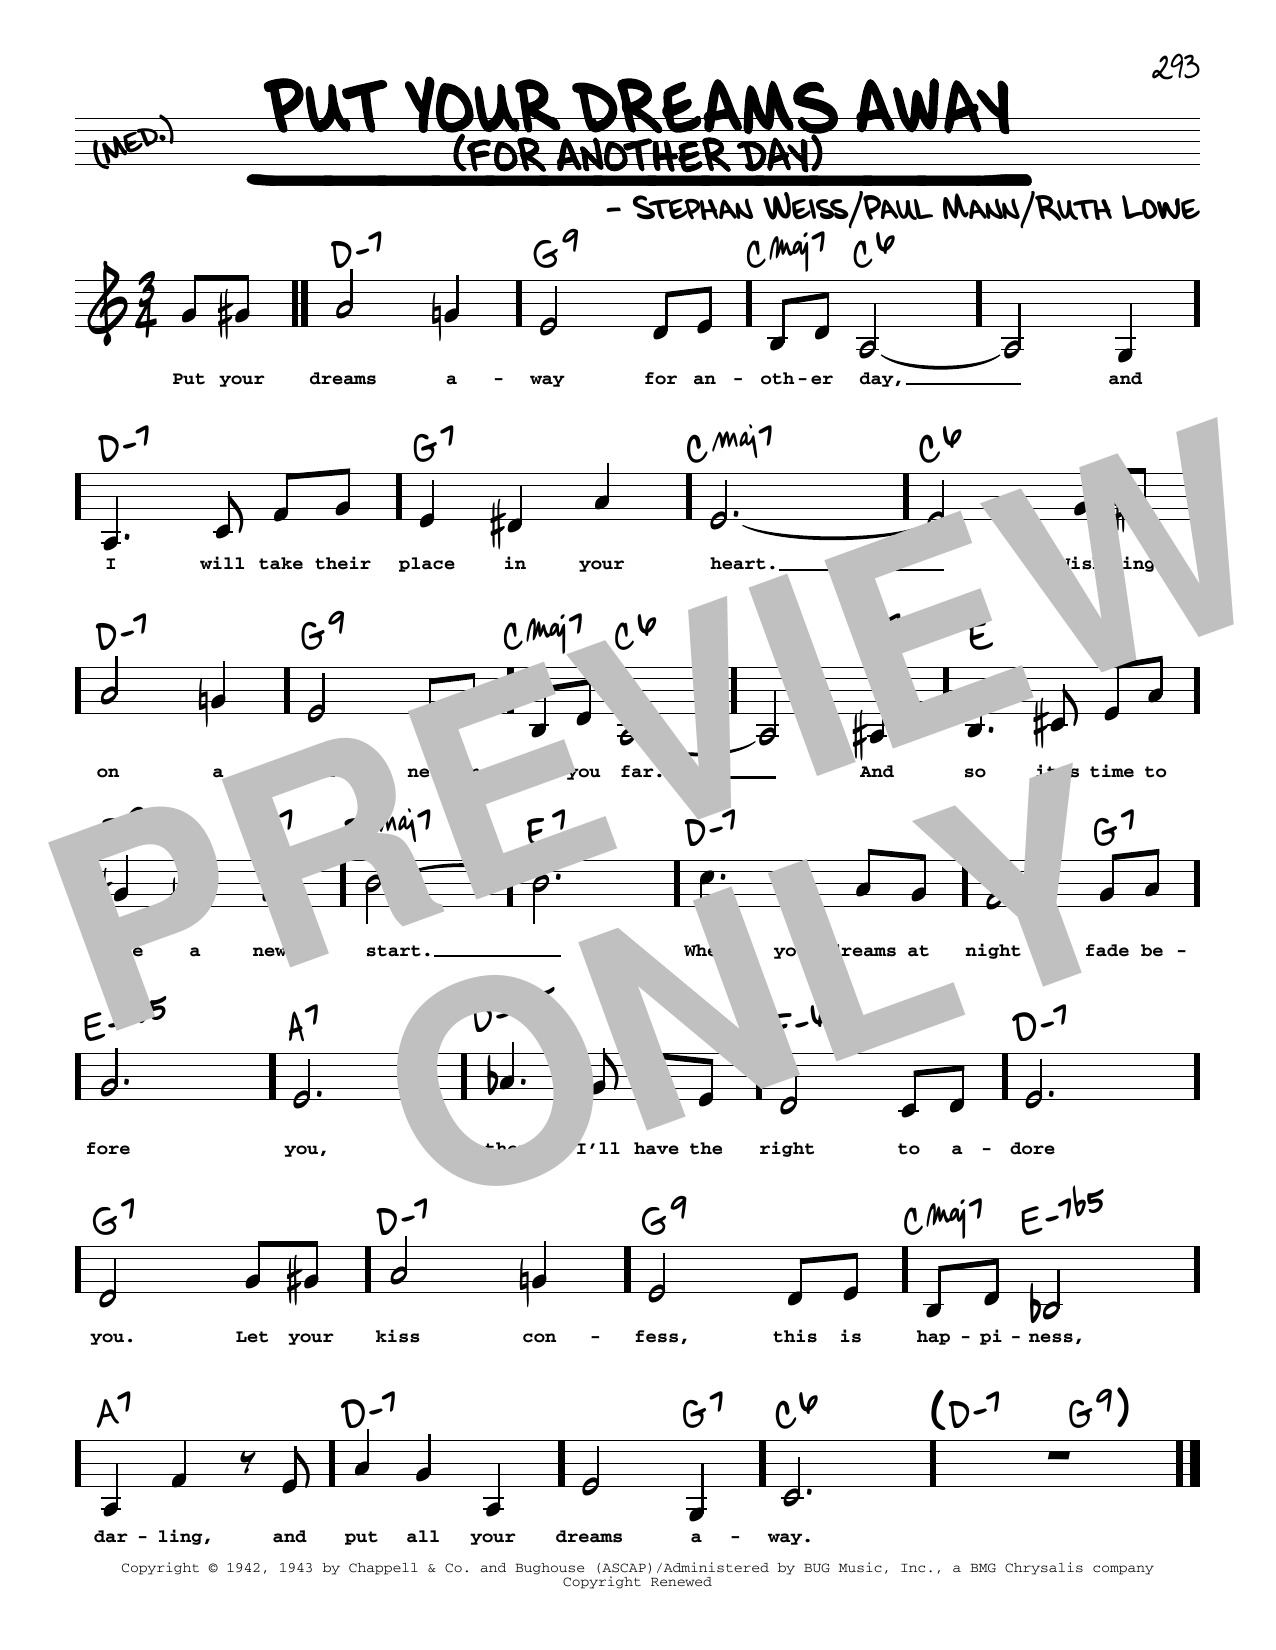 Frank Sinatra Put Your Dreams Away (For Another Day) (Low Voice) sheet music notes printable PDF score